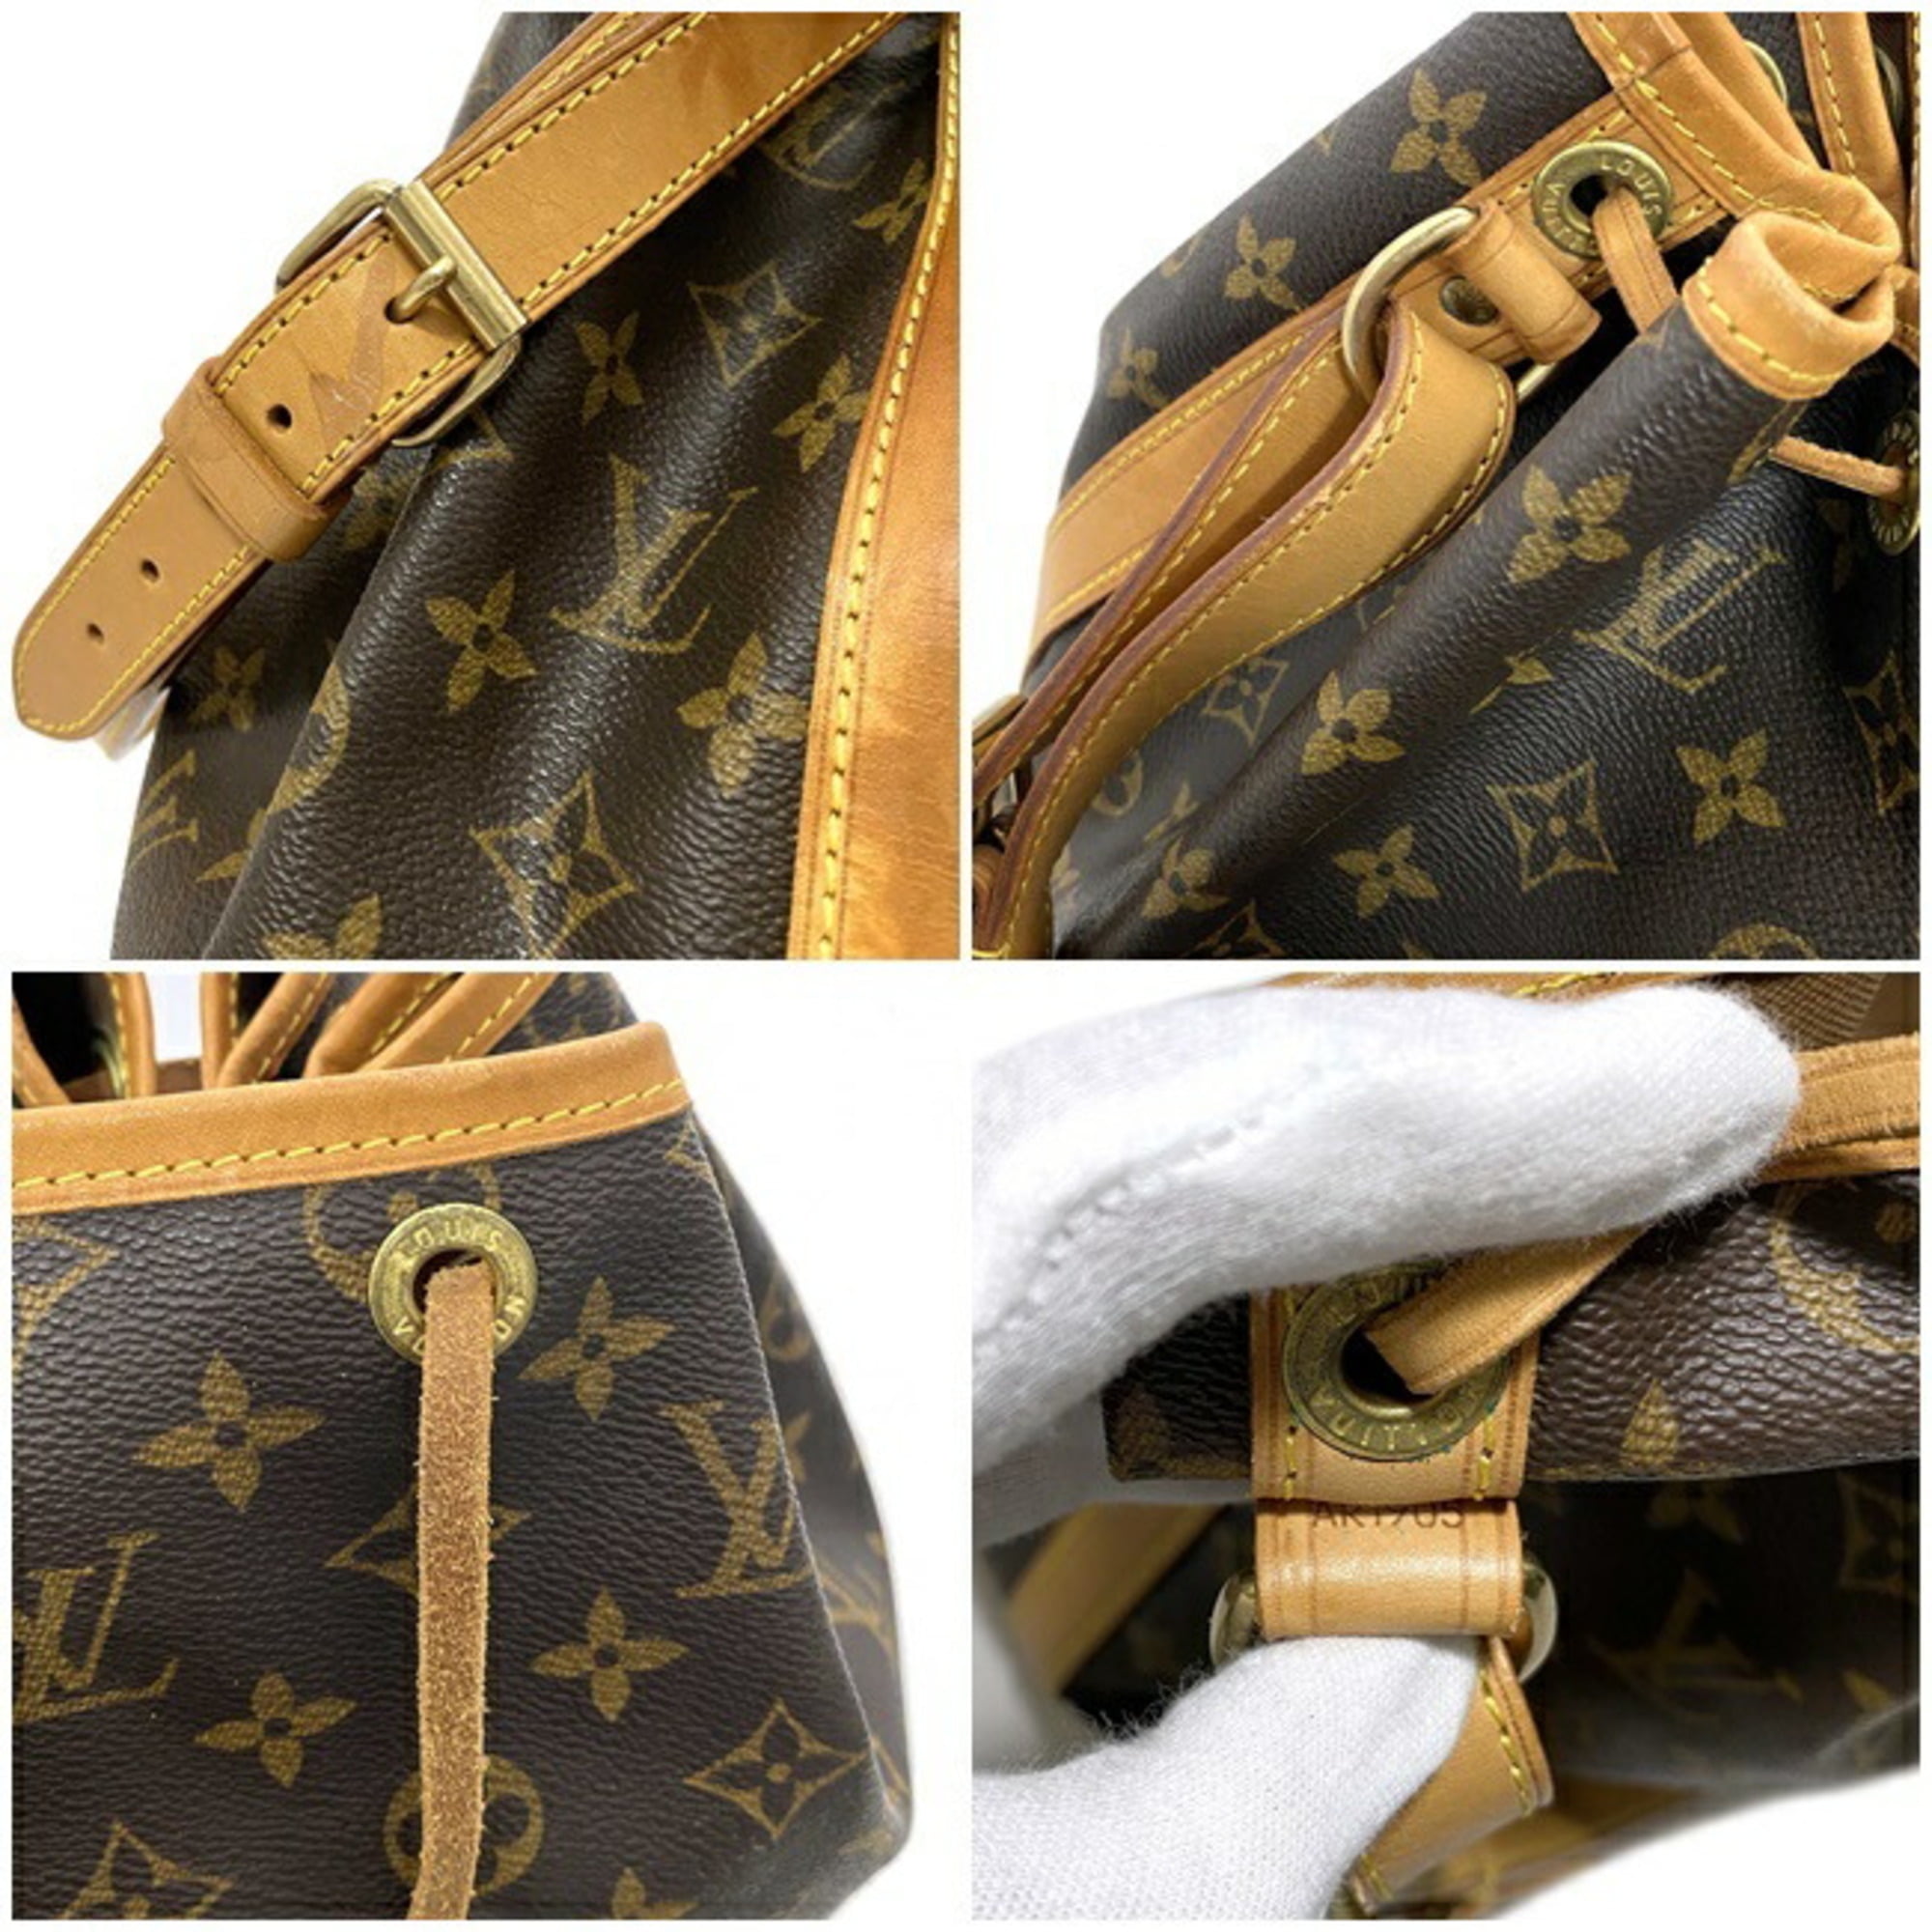 Buy Louis Vuitton Tote Bag Rivet Brown Beige Monogram M40140 Stitch  Monogram Canvas Nume Leather Used SP1068 from Japan - Buy authentic Plus  exclusive items from Japan